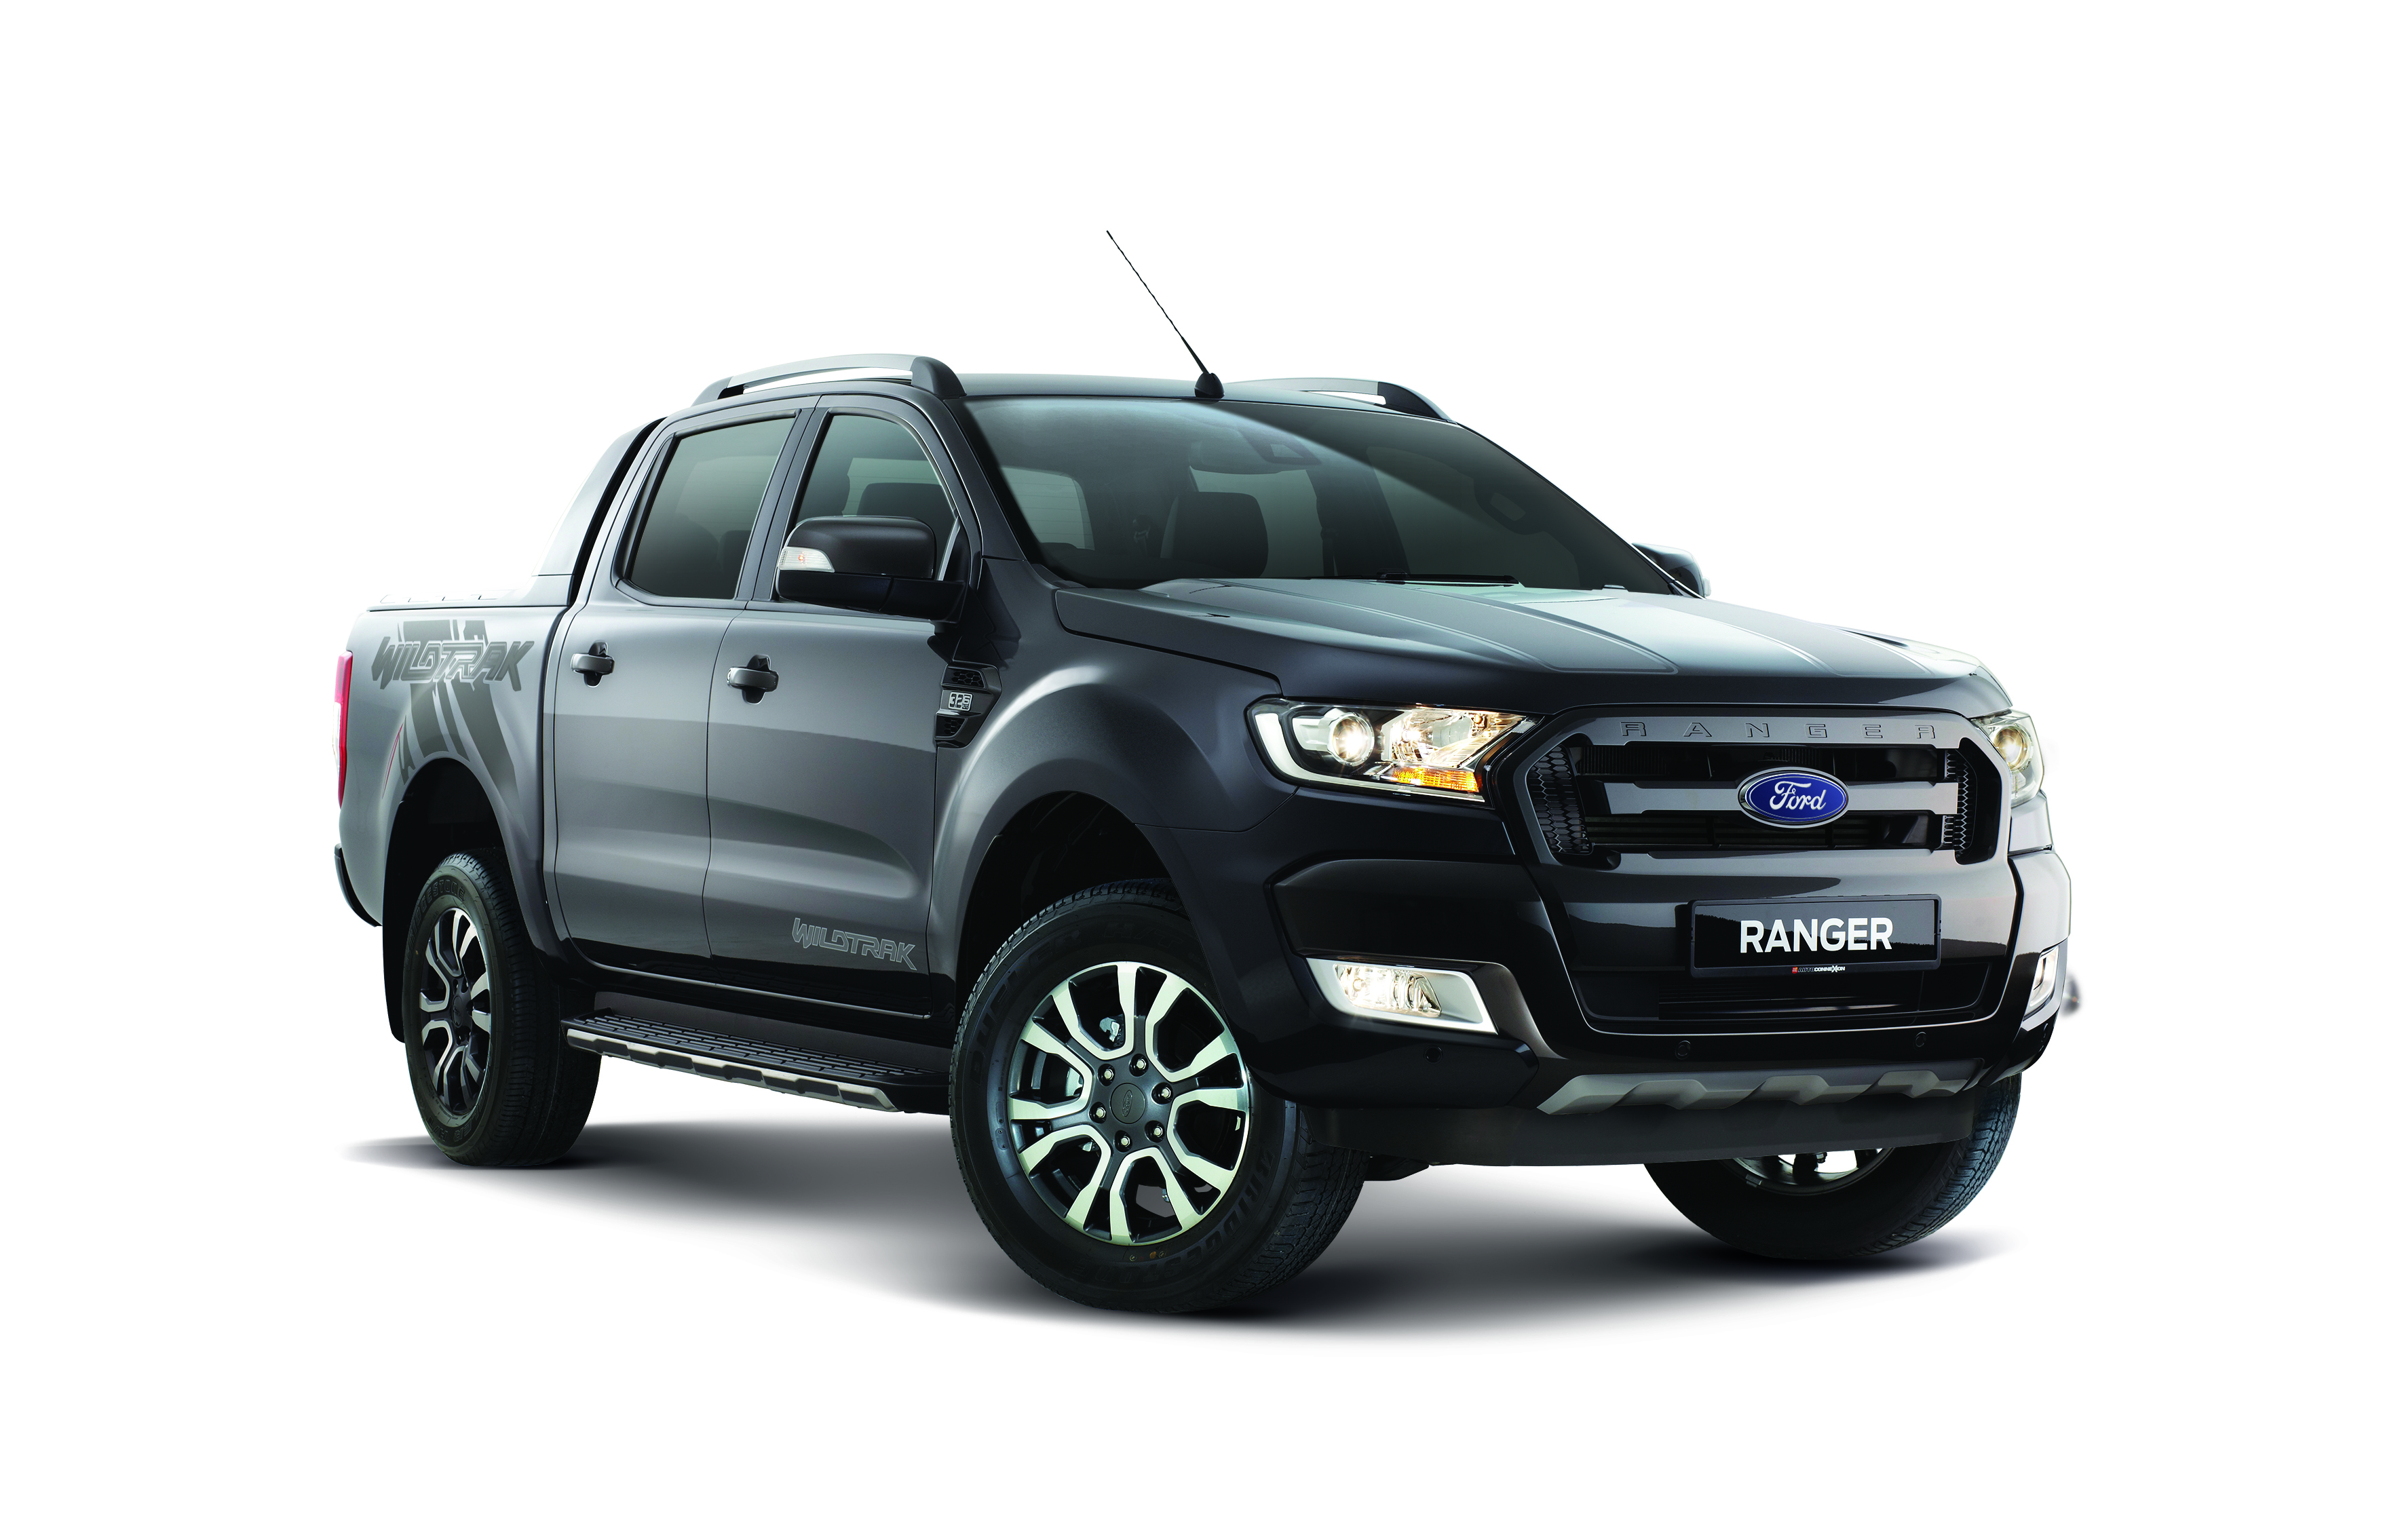 Ford Ranger Double Cab hd big